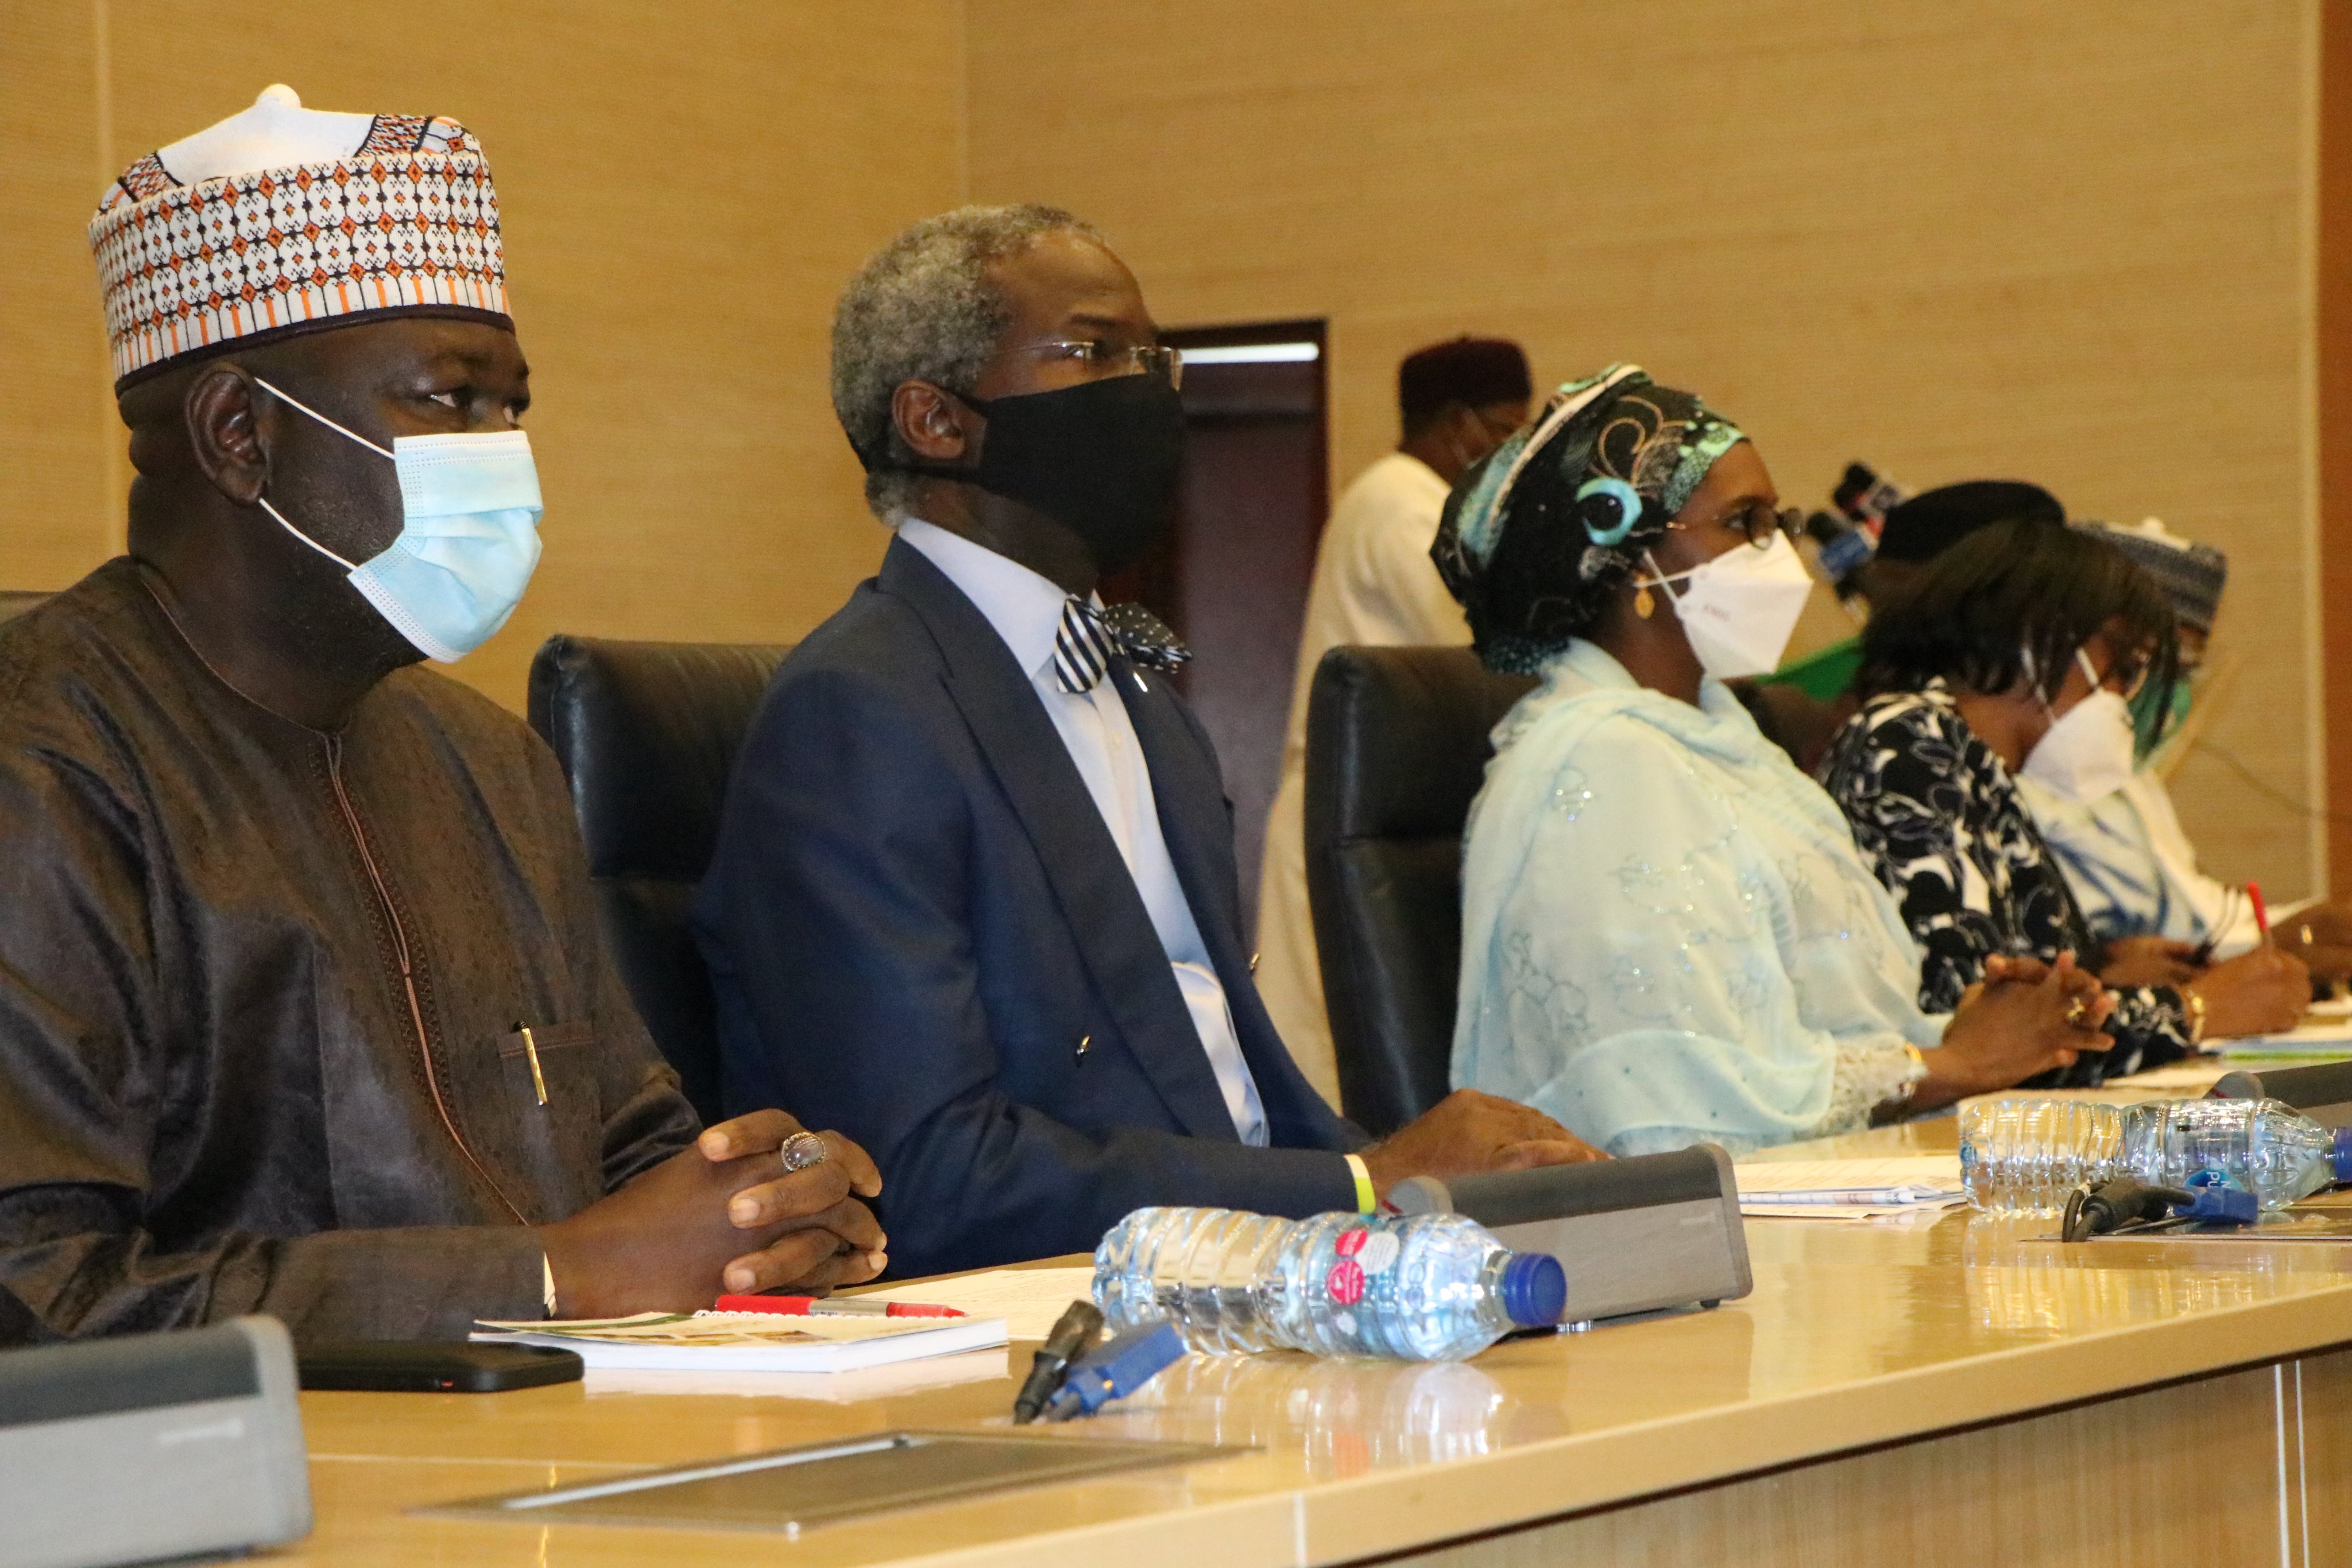 Mr Babatunde Fashola, Minister of Works and Housing; Minister of State, Engr Abubakar D.Aliyu; Minister of Minister of Finance, Budget and National Planning, Mrs Zainab S Ahmed and other government functionaries at the handing over ceremony. [Twitter/@FMWHNIG]